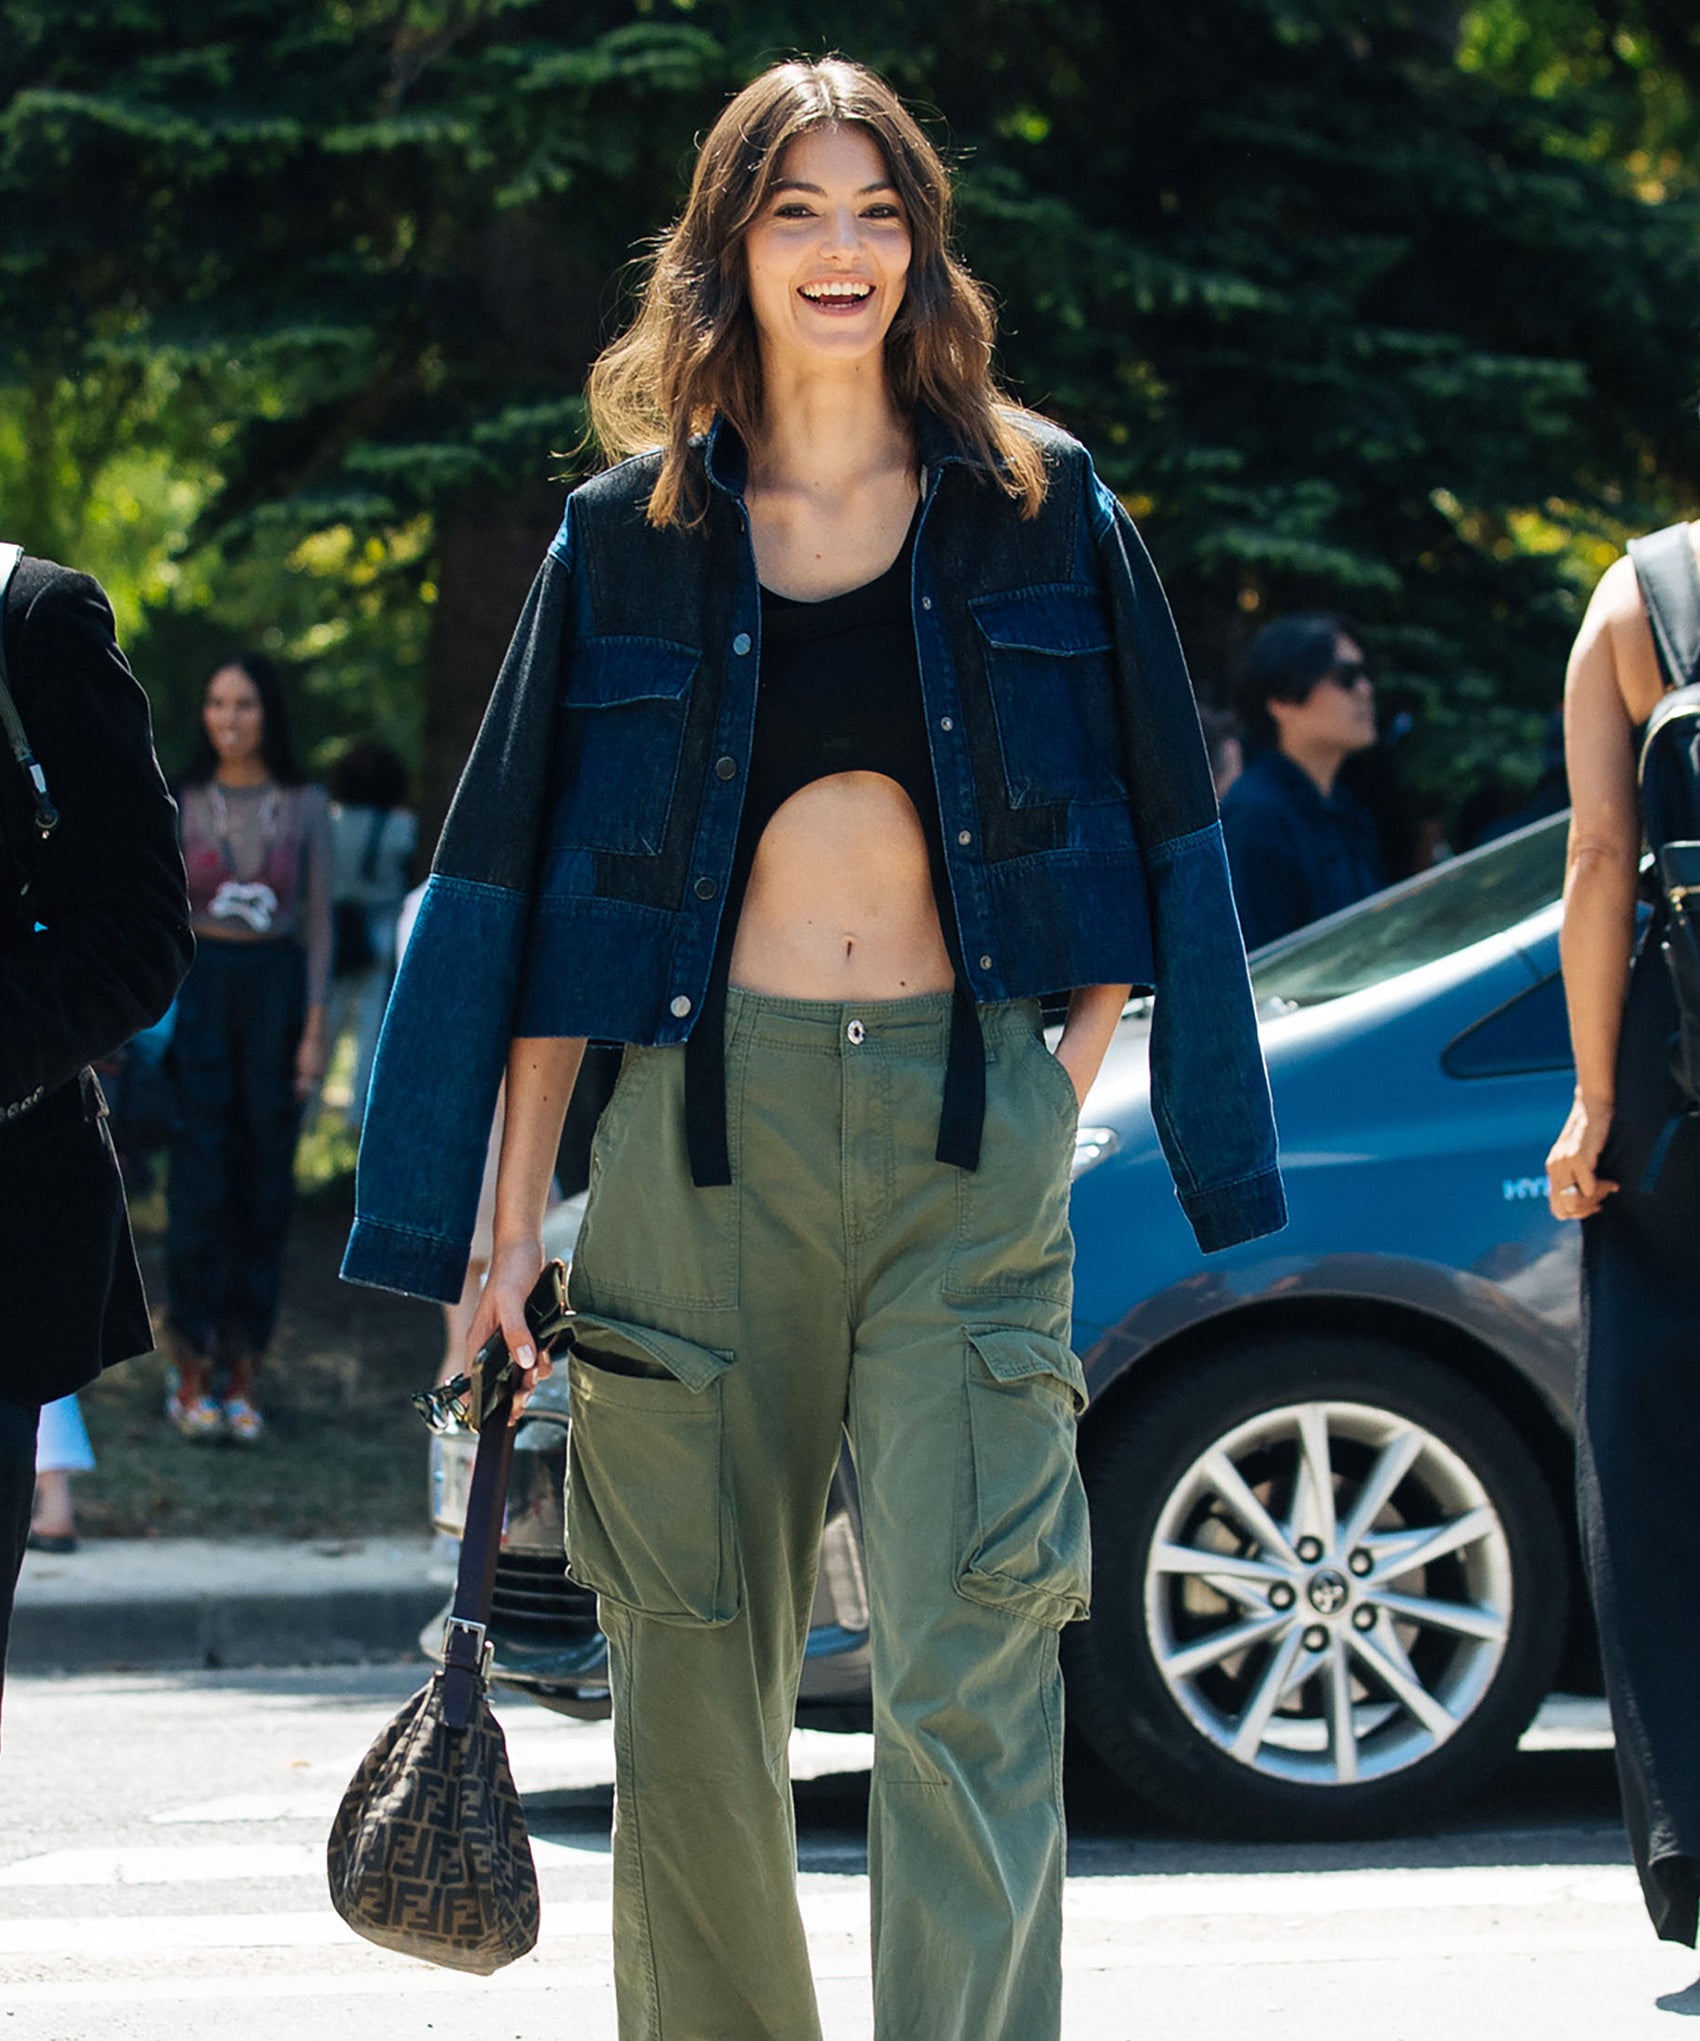 Cargo Jeans Are a Versatile Take on the Utilitarian Trend